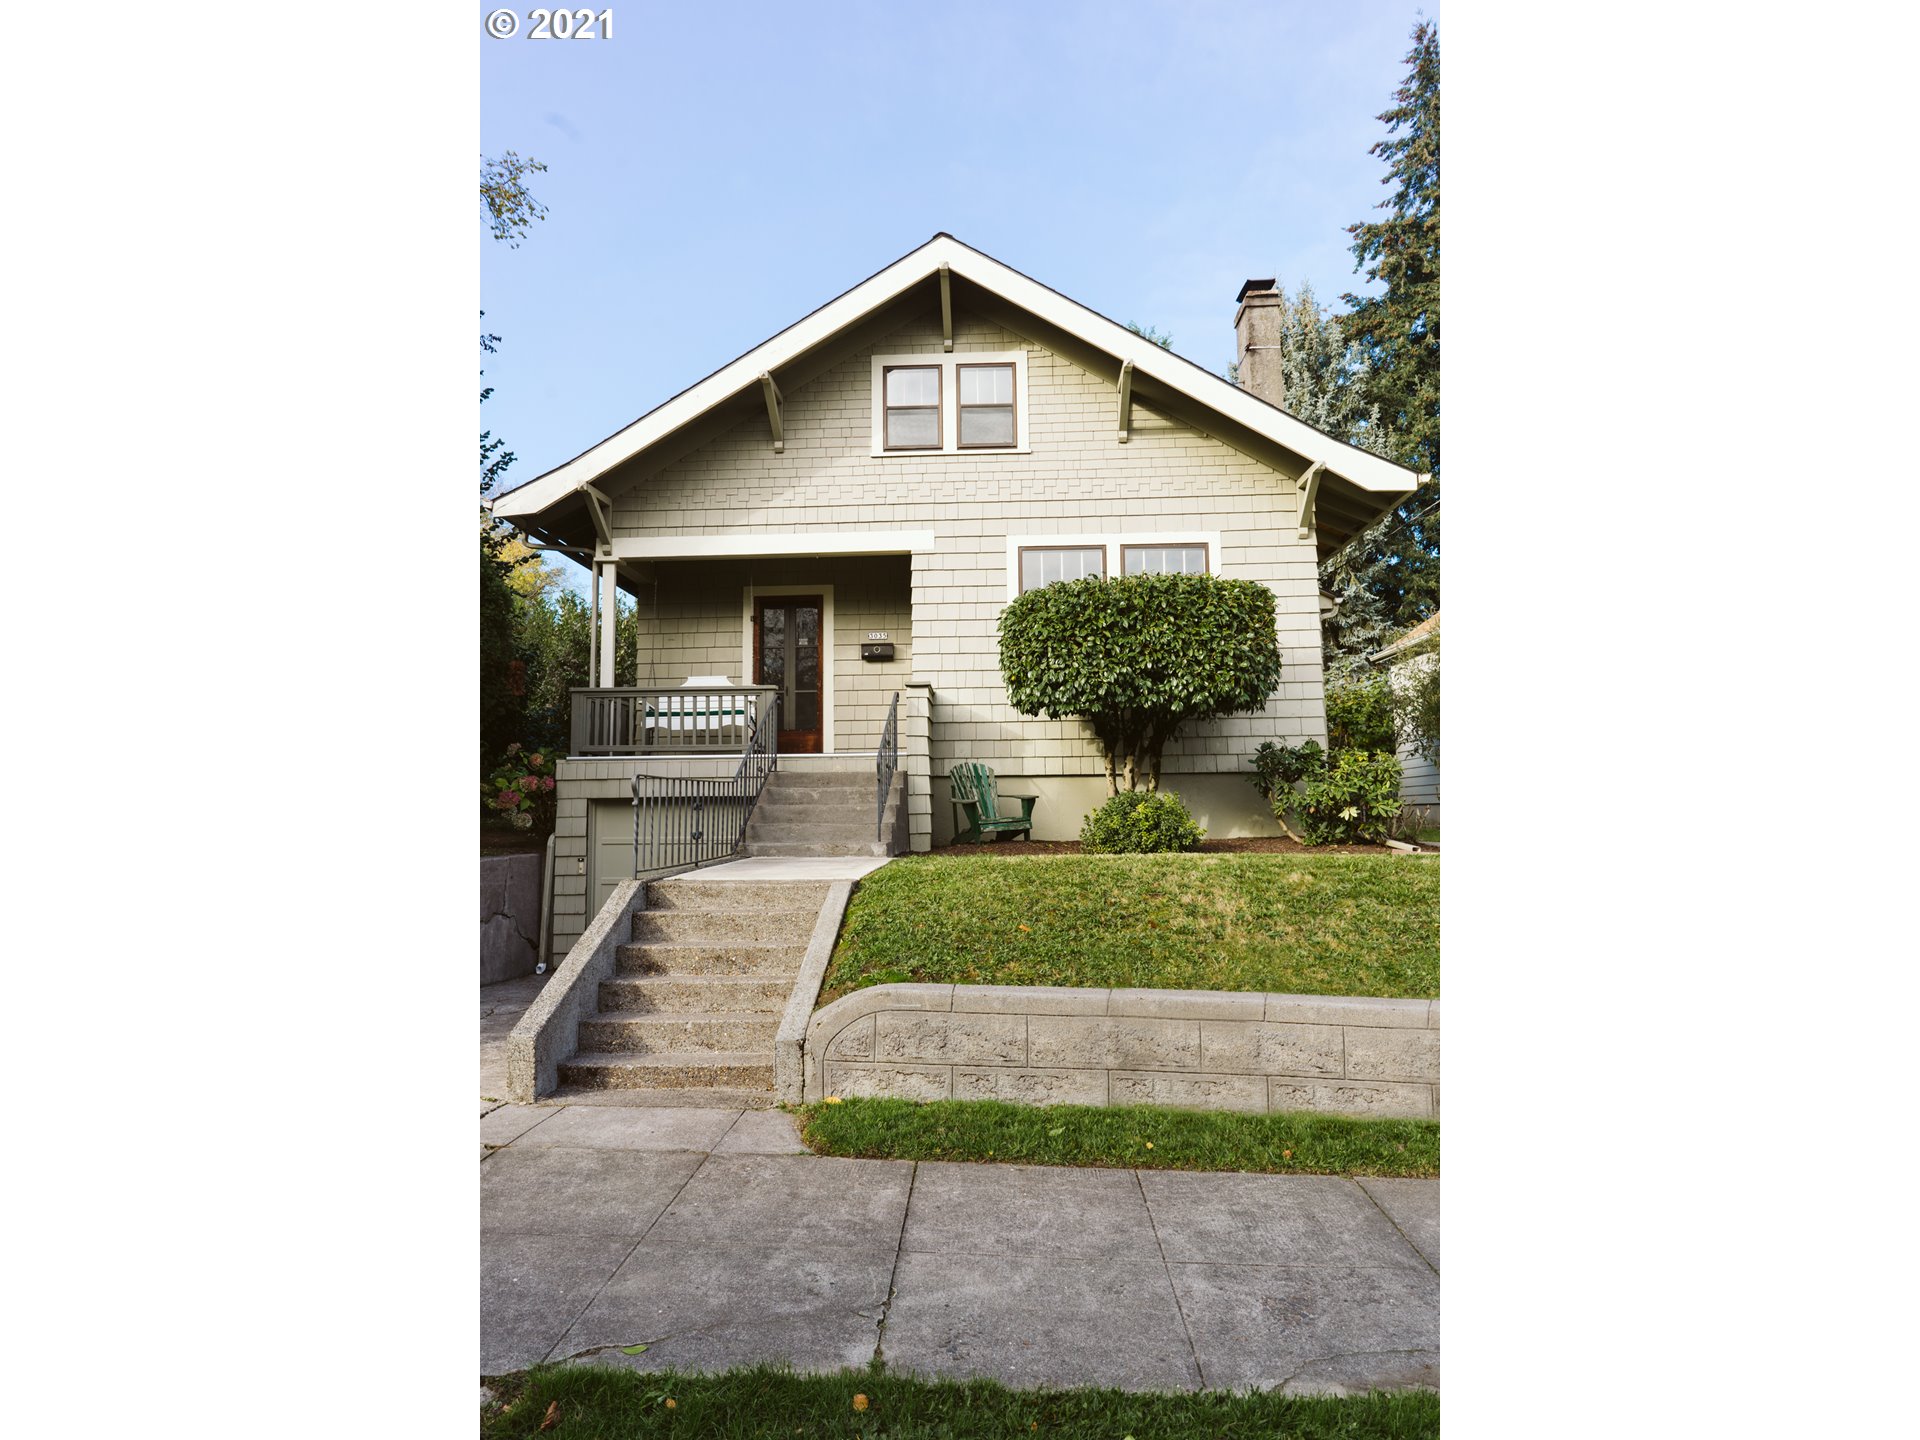 3035 SE 9TH AVE (1 of 1)